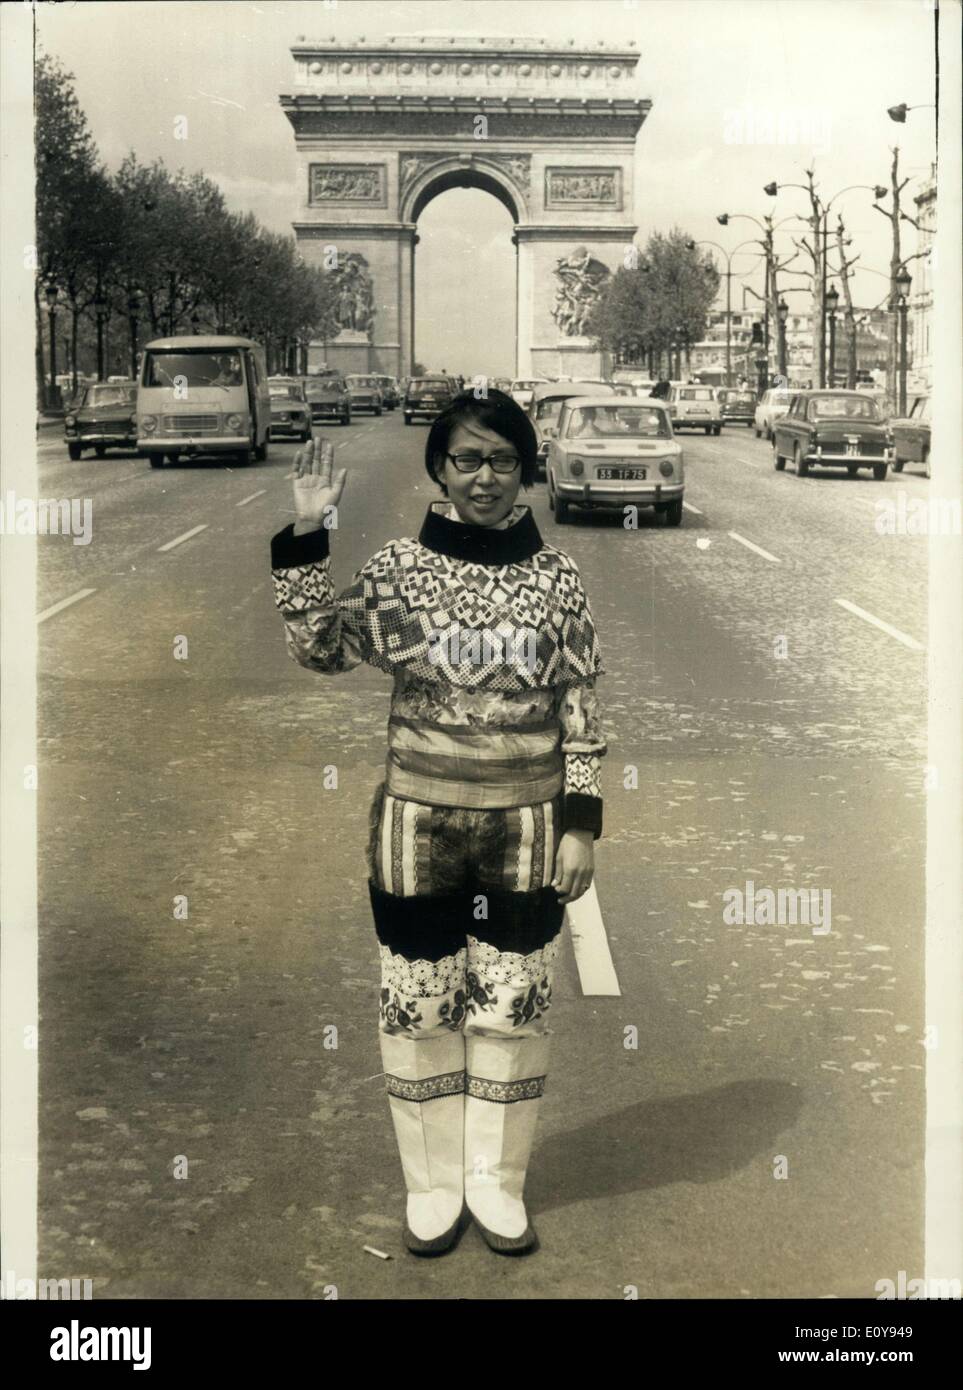 May 06, 1969 - New French Policewoman? No, unluckily just a charming Esquimau woman, who is coming back from an expedition in Groenland, the ''Damart-Thermolacty;'' expedition, and visiting Paris. This expedition was made in order to test the underweares ''Thermolactyl'', famous in all the world by their qualilties of heat keepers and thermic isolation. Photo shows The Esquimau woman acting like a policeman on the champs-elysees. Stock Photo